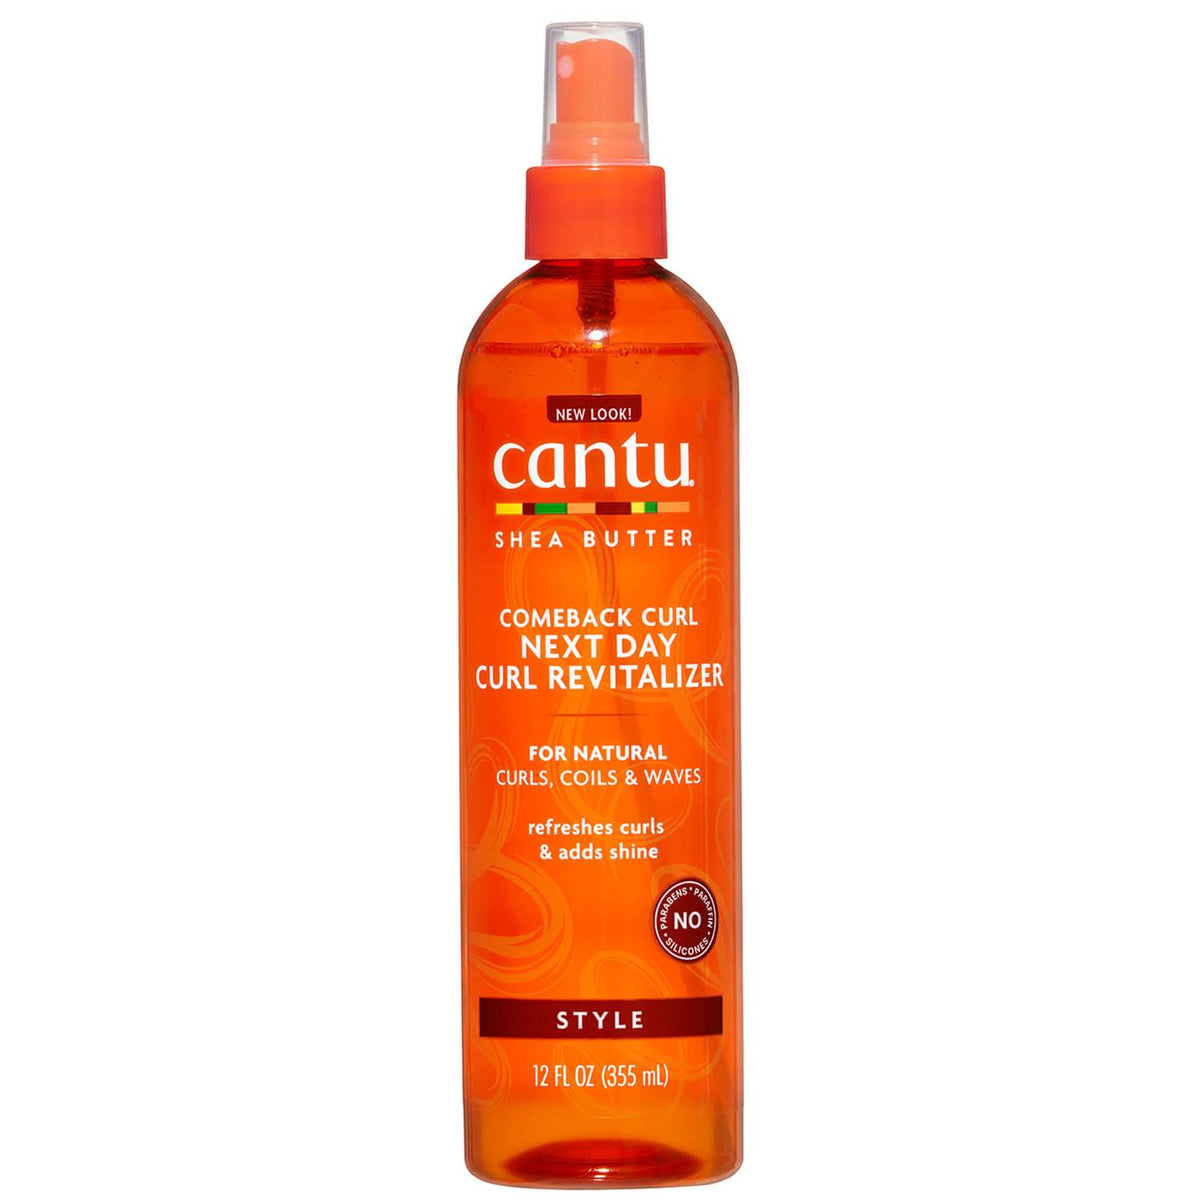 Cantu Shea Butter for Natural Hair Comeback Curl Next Day Curl Revitalizer 355ml Intlcosmetic